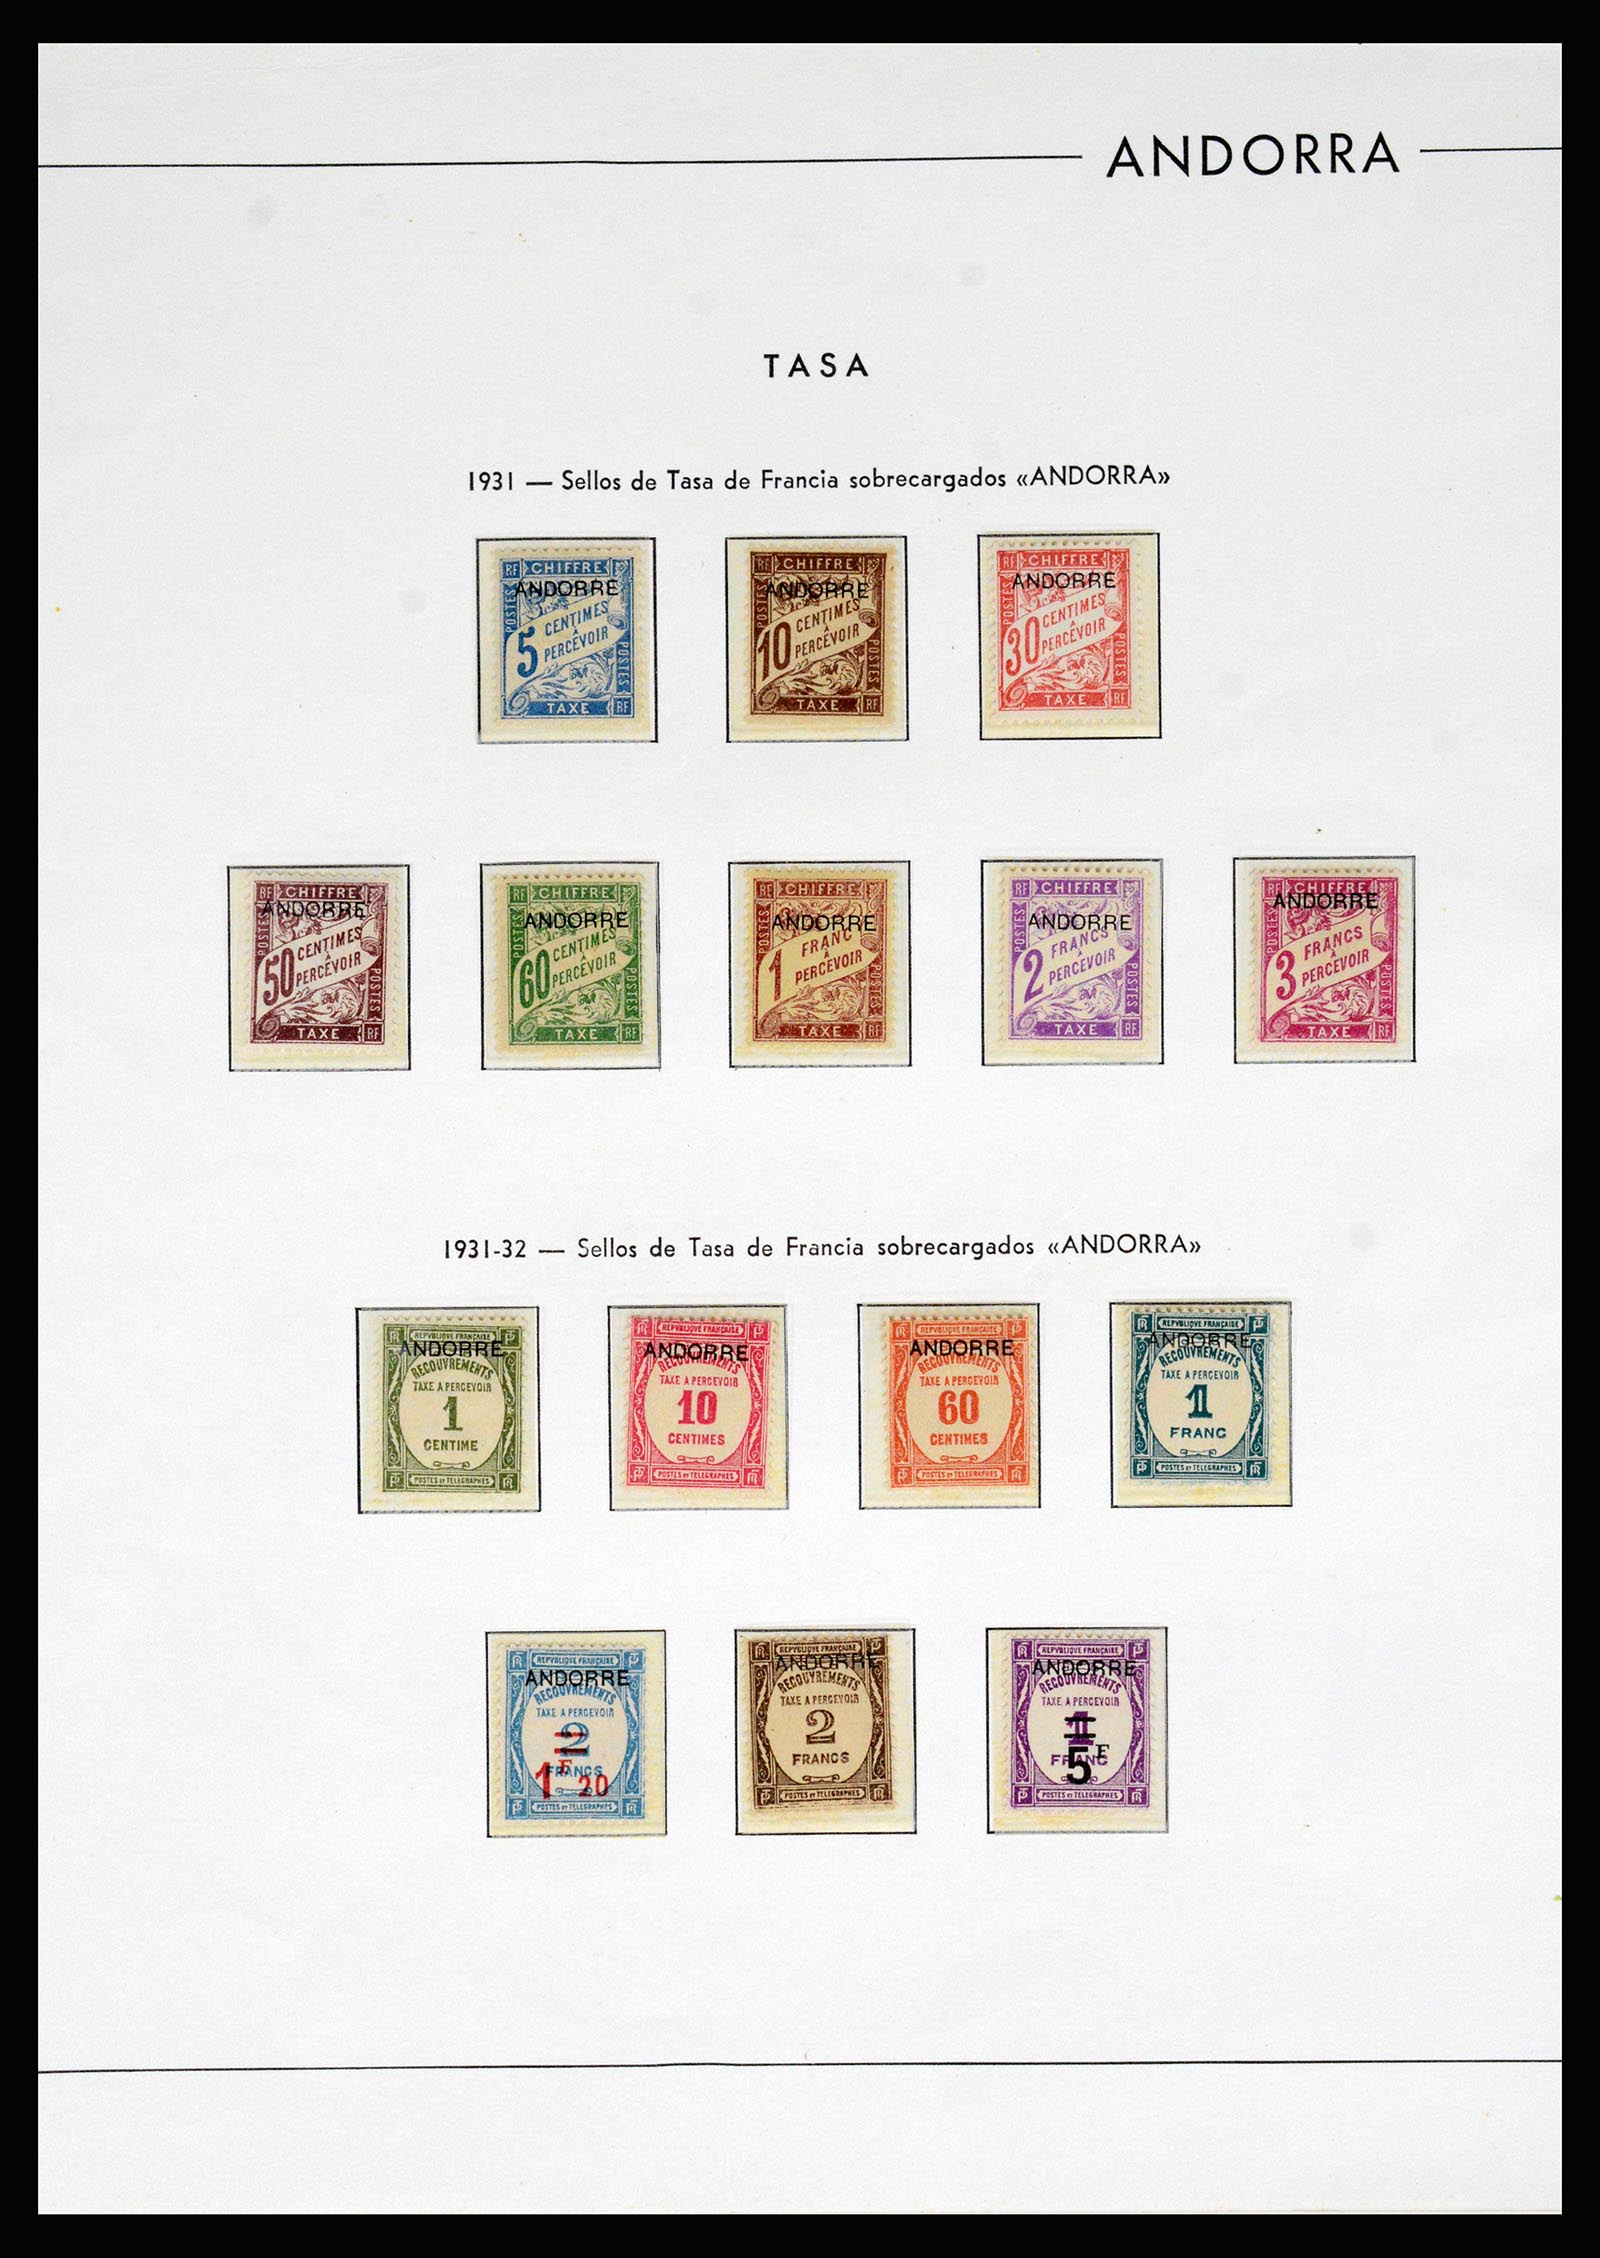 37165 067 - Stamp collection 37165 French Andorra 1931-2001.